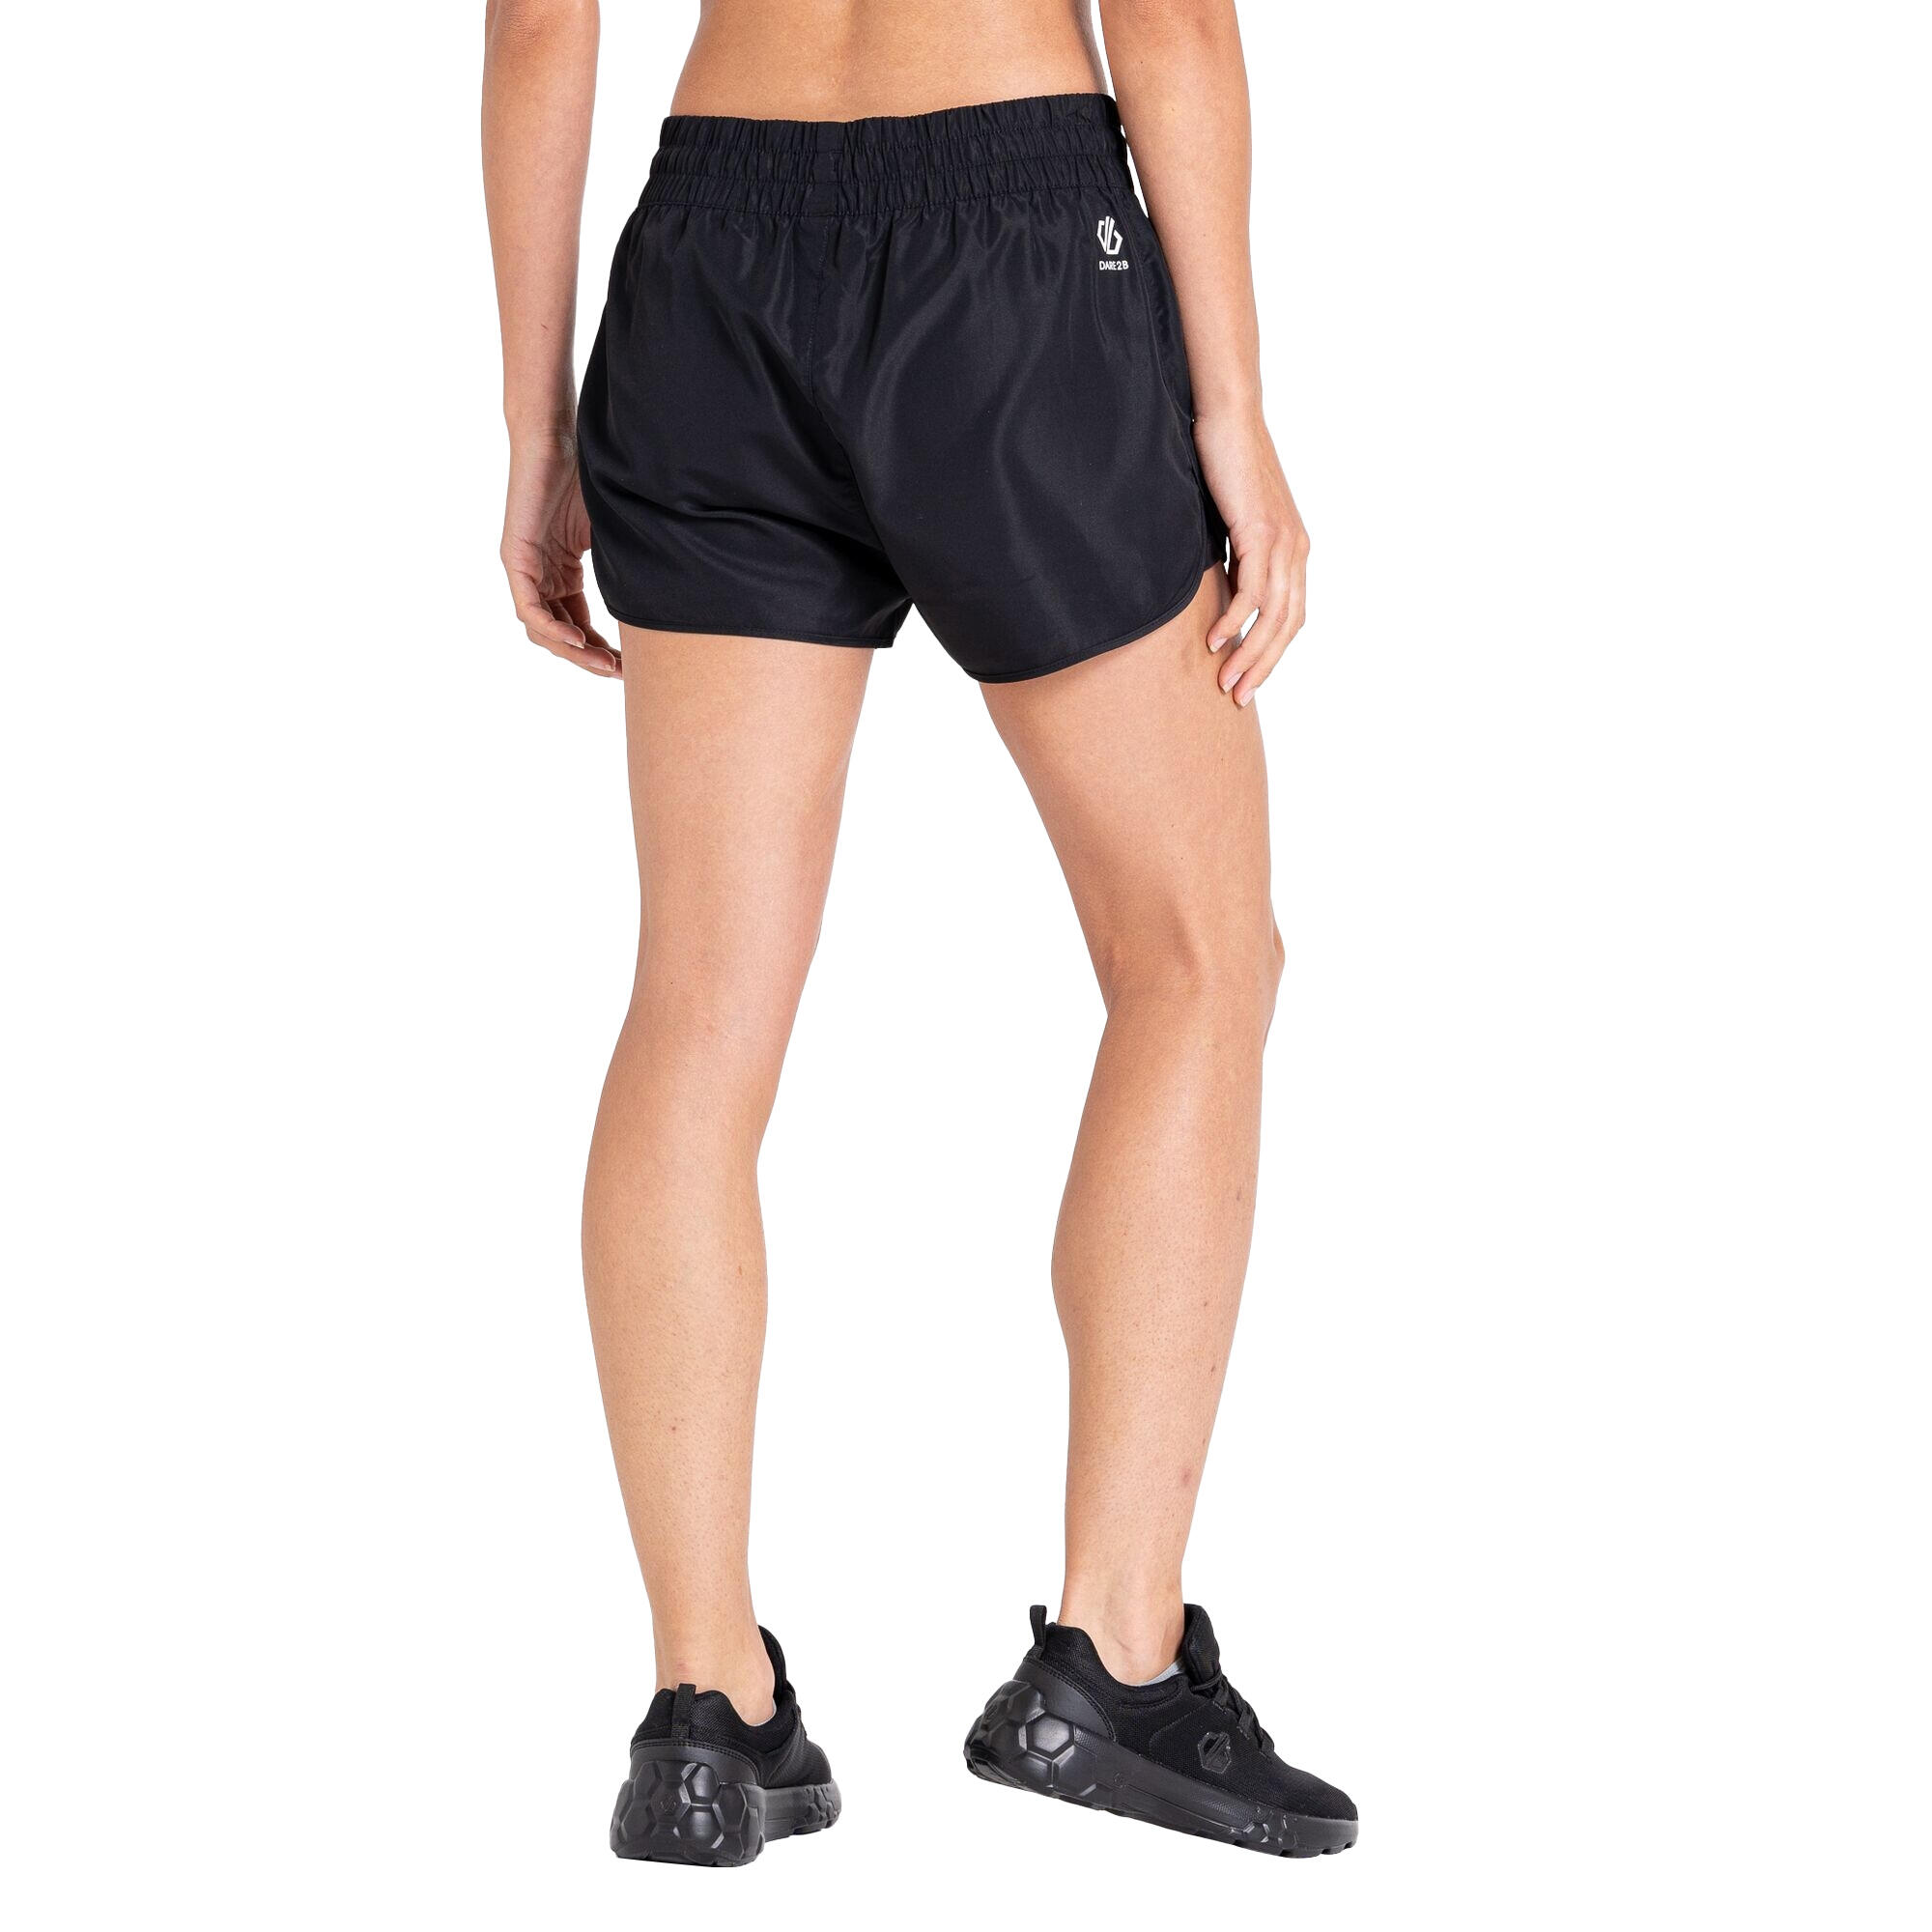 Womens/Ladies The Laura Whitmore Edit Sprint Up 2 in 1 Shorts (Black) 4/5